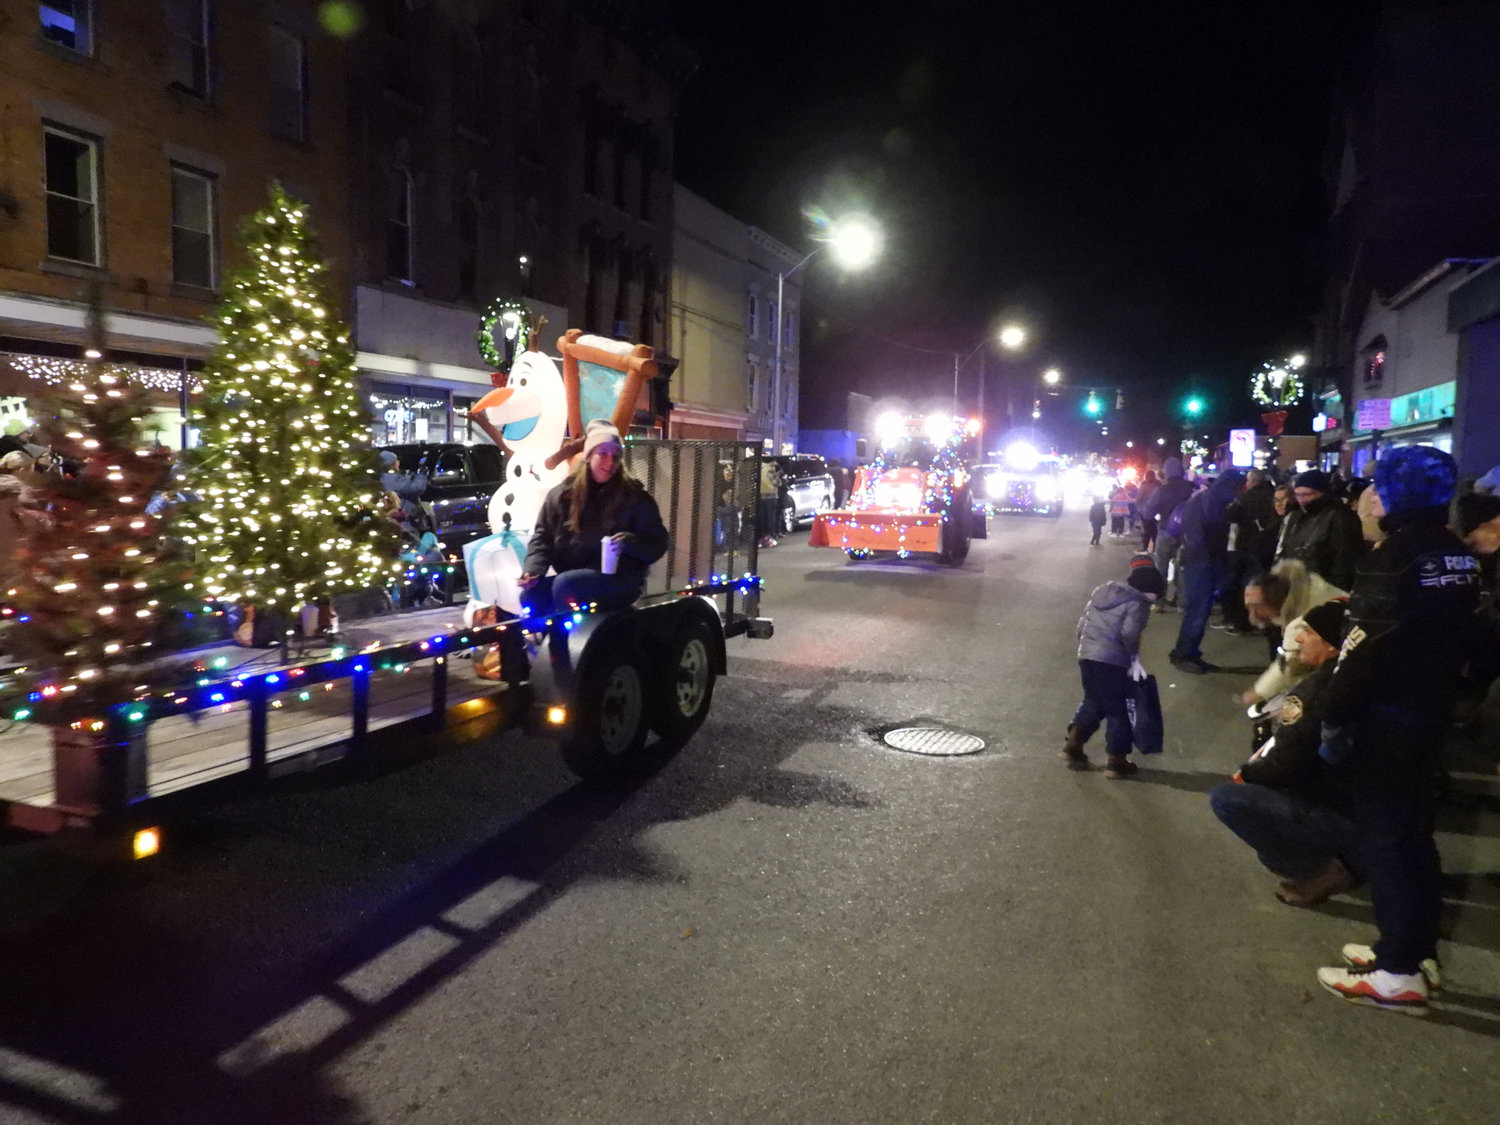 The city of Oneida welcomed in the holiday season with its second annual Parade of Lights, annual tree lighting, and a visit from Santa Claus.